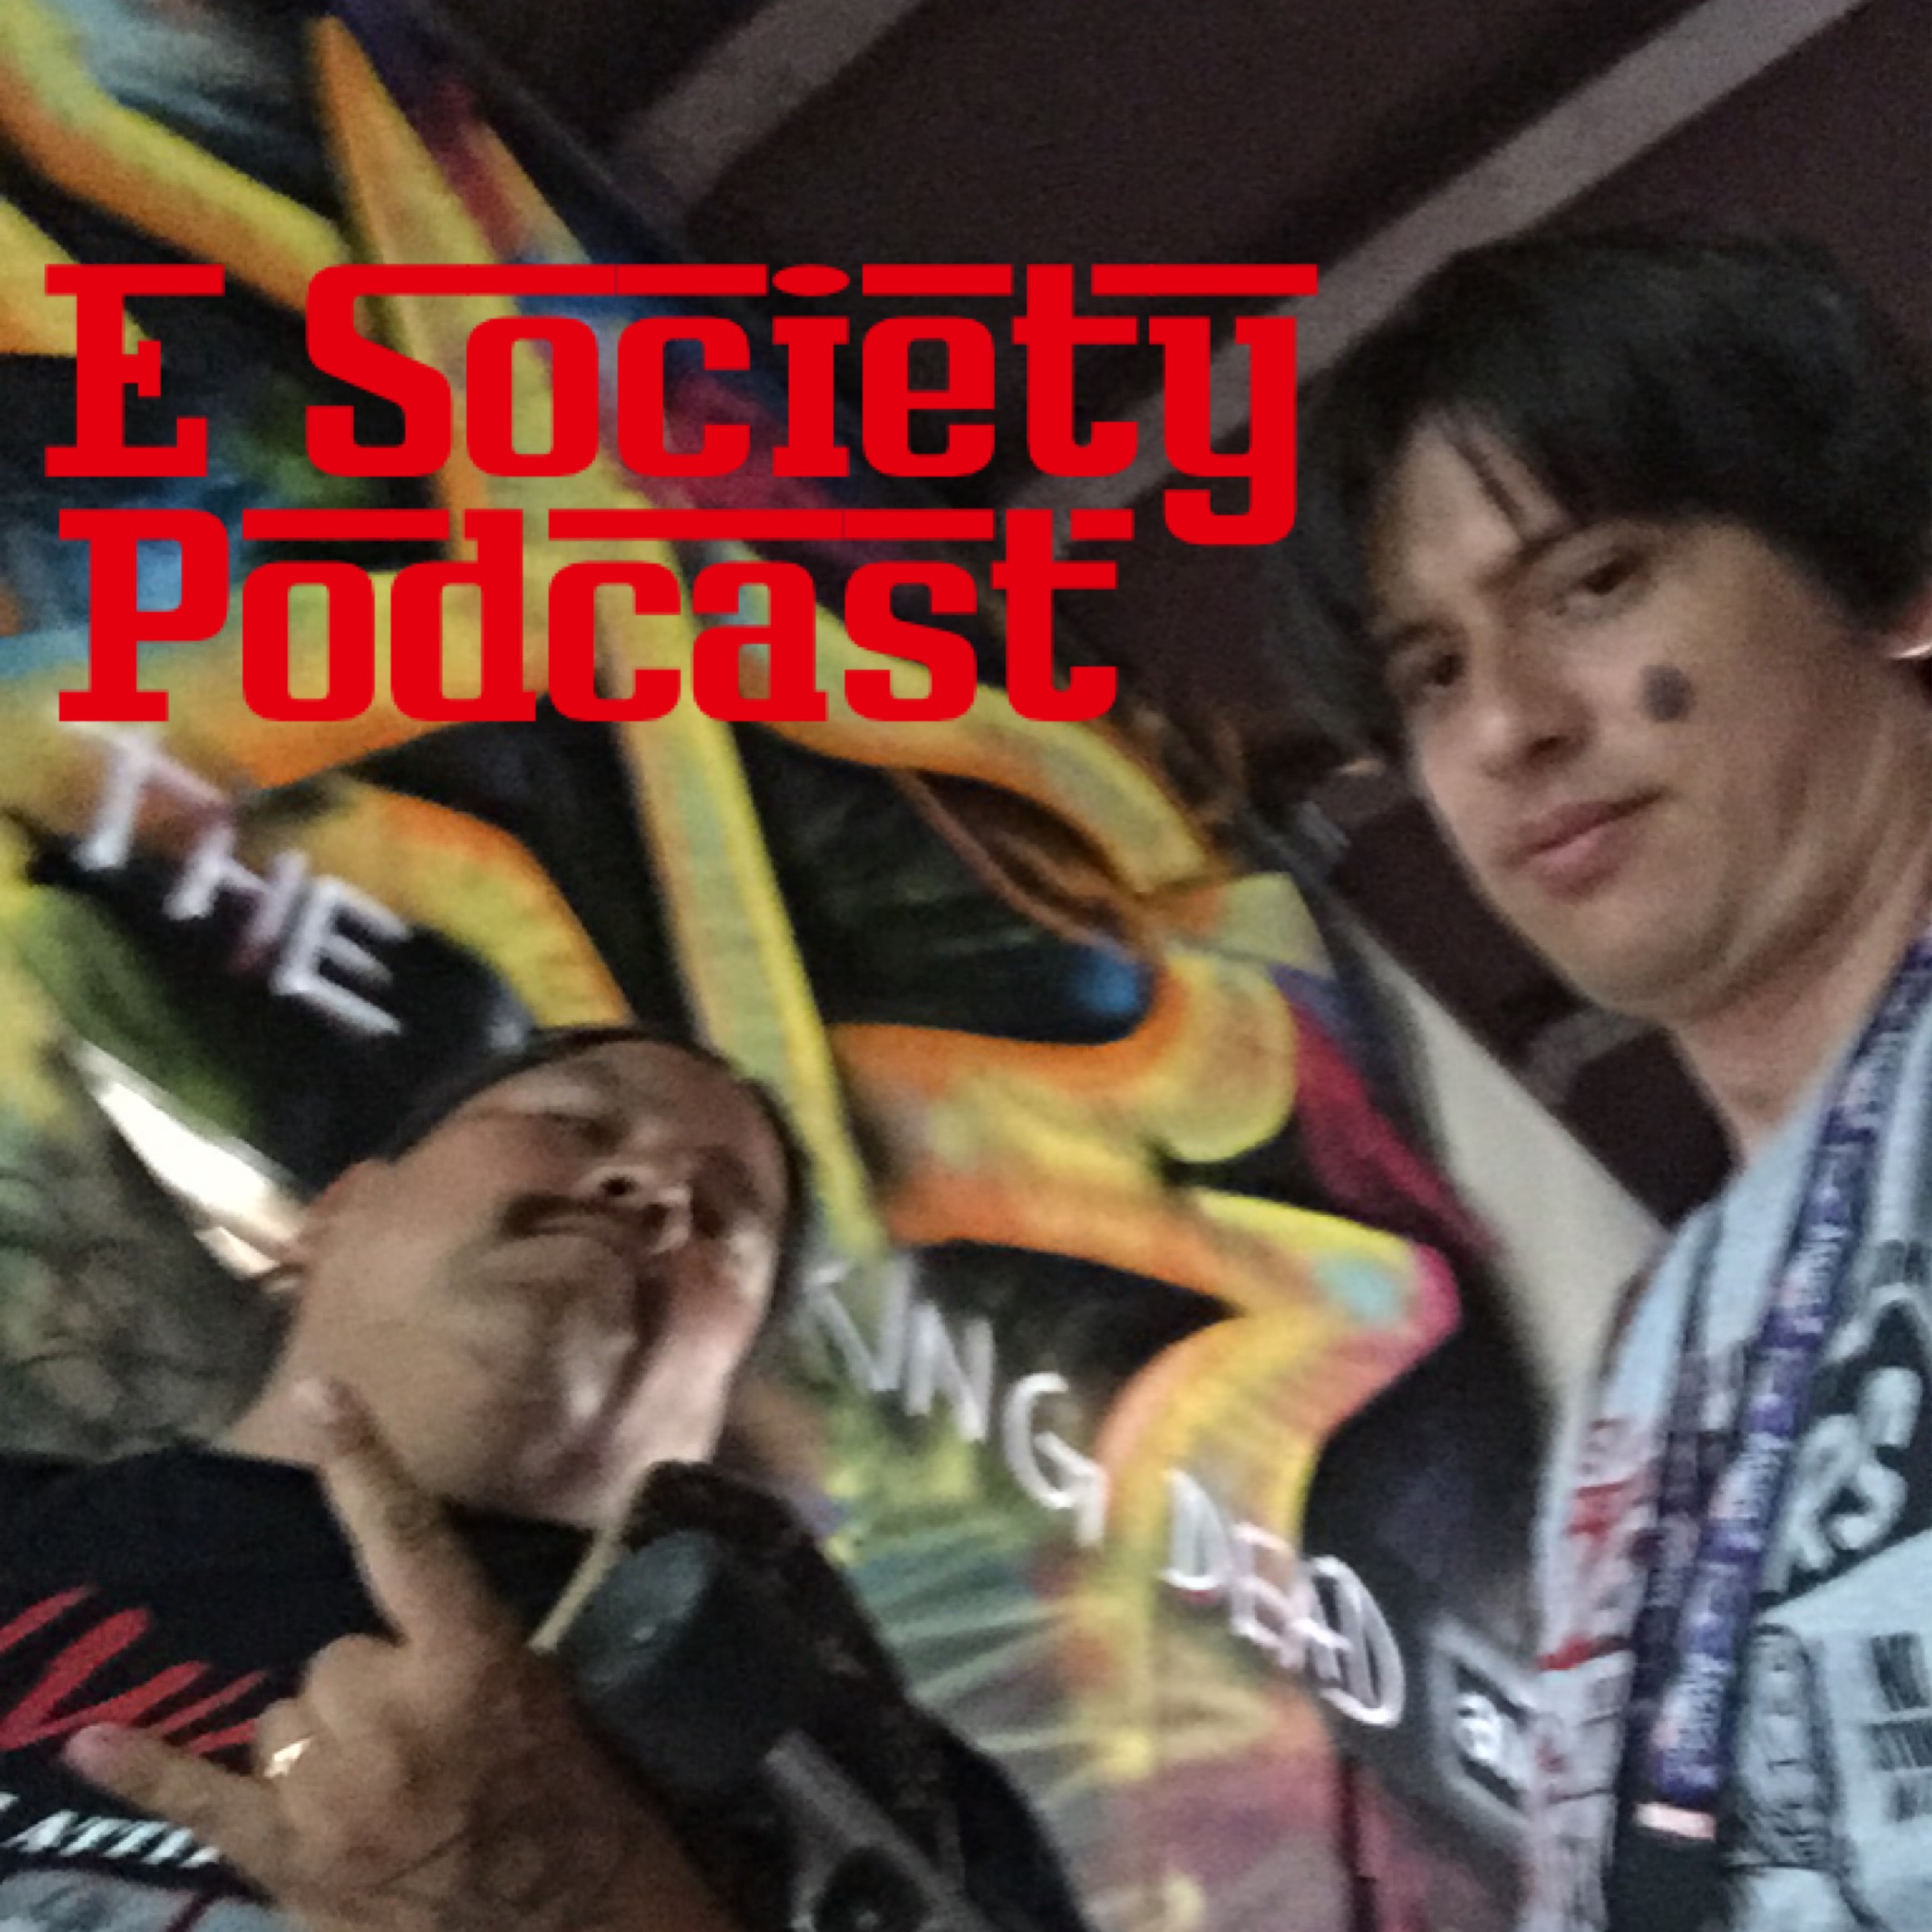 E Society Podcast - Ep. 78: A week late 